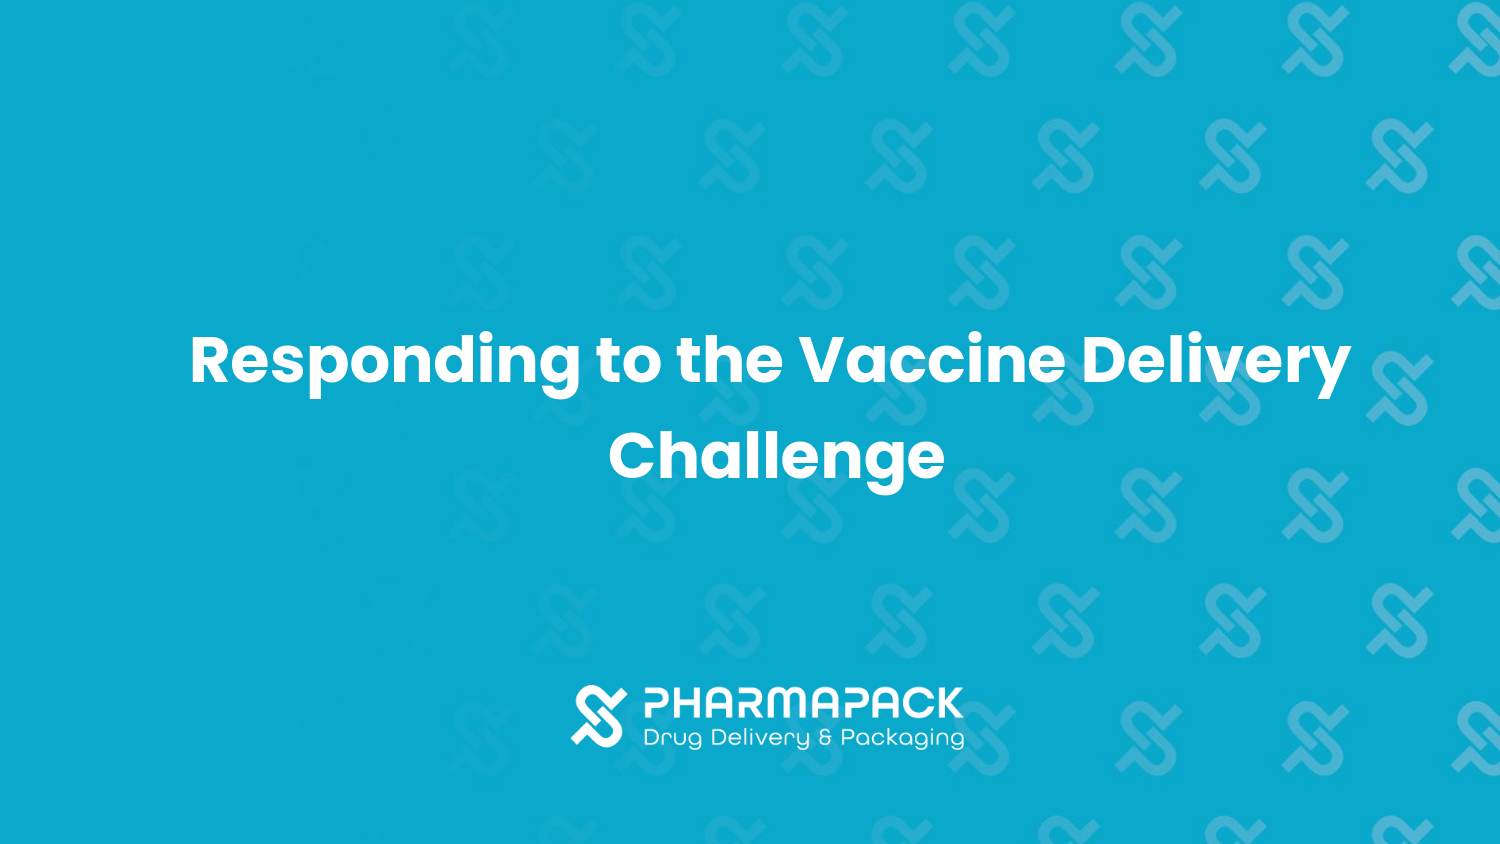 Responding to the Vaccine Delivery Challenge